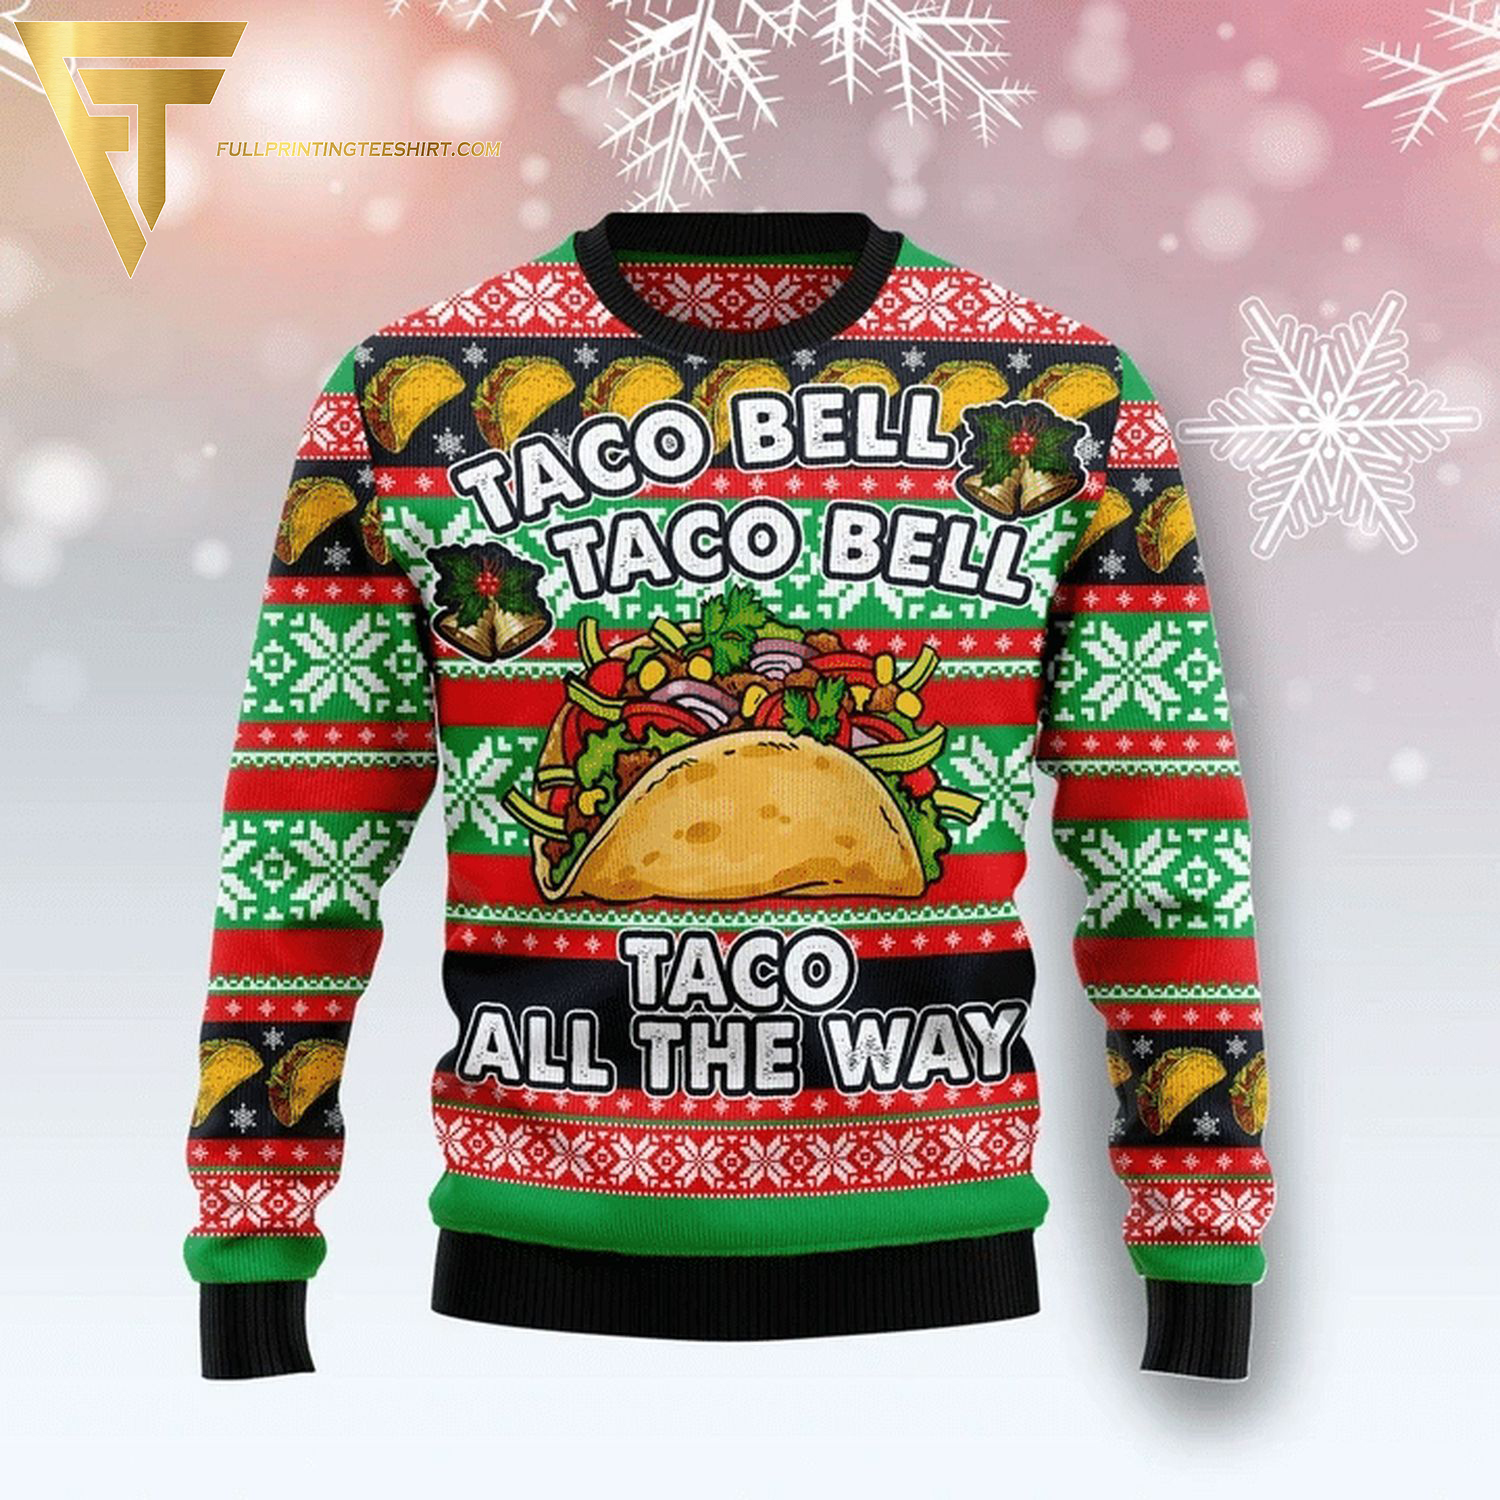 Taco Bell Taco Bell Taco All the Way Full Print Ugly Christmas Sweater